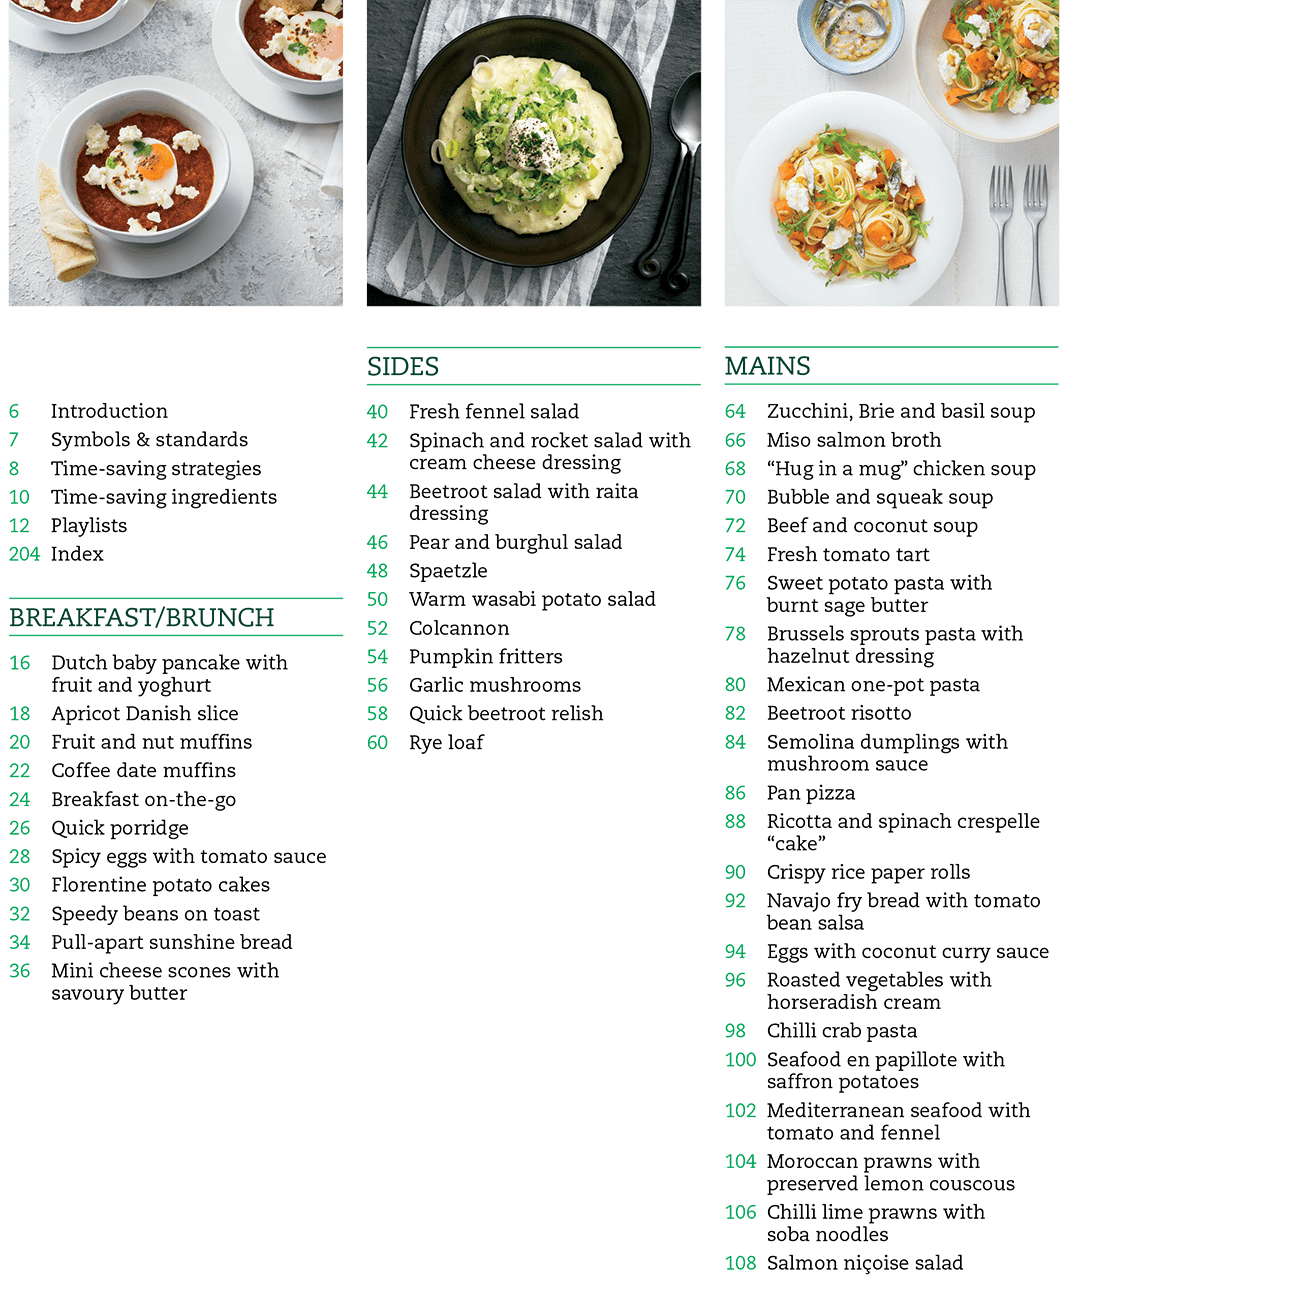 Thermomix-New-Zealand Thermomix Thermomix Meals in a Flash Cookbook TM5 TM6 Cookbook